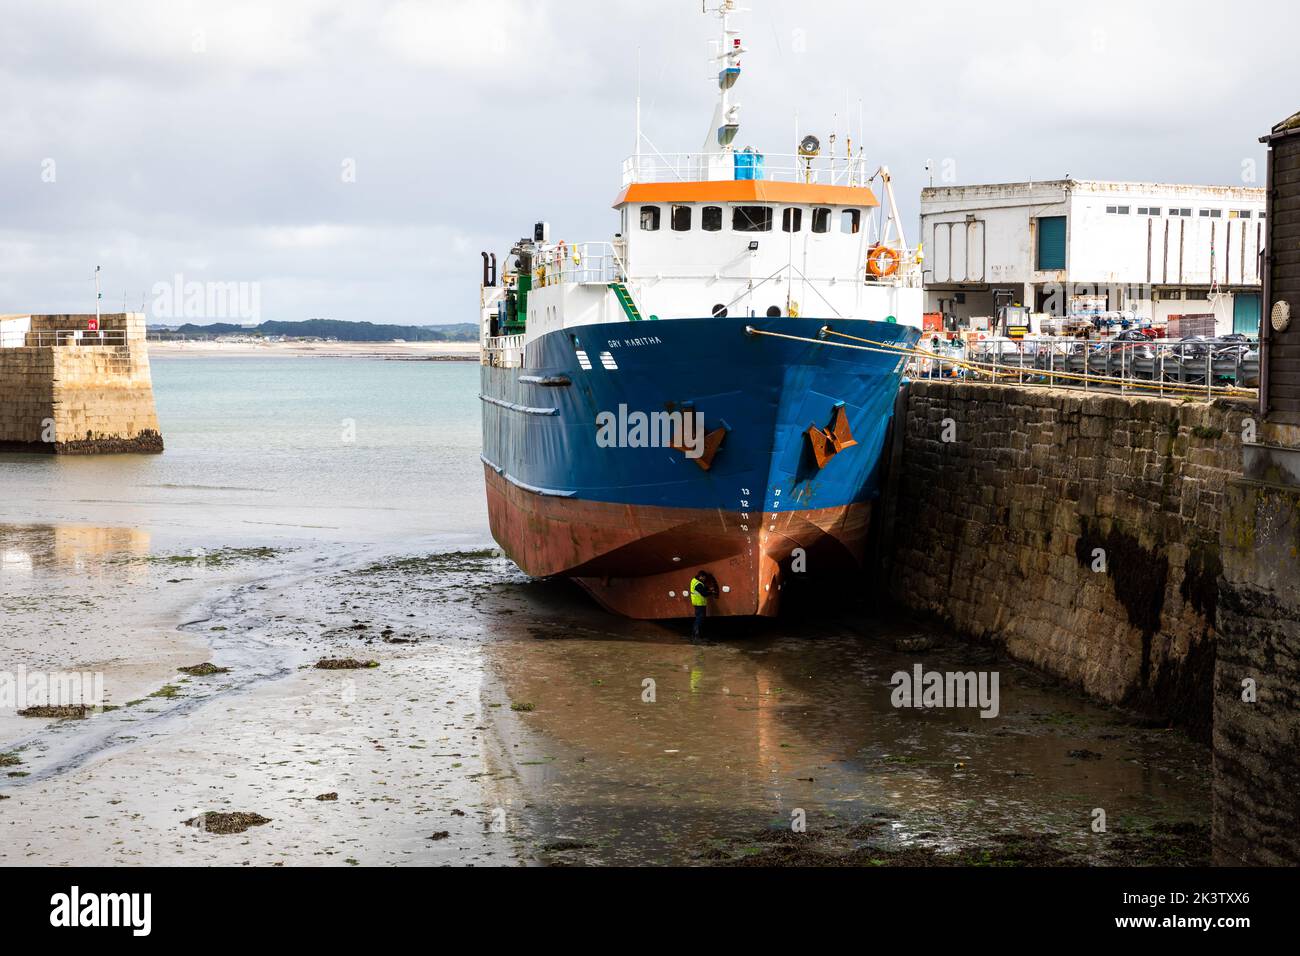 Penzance,Cornwall,28th September 2022,Gry Maritha moored in Penzance, Cornwall. The temperature was only 12C with light rain showers and a moderate breeze, it is forecast to be dull and wet for the rest of the week.Credit: Keith Larby/Alamy Live News Stock Photo